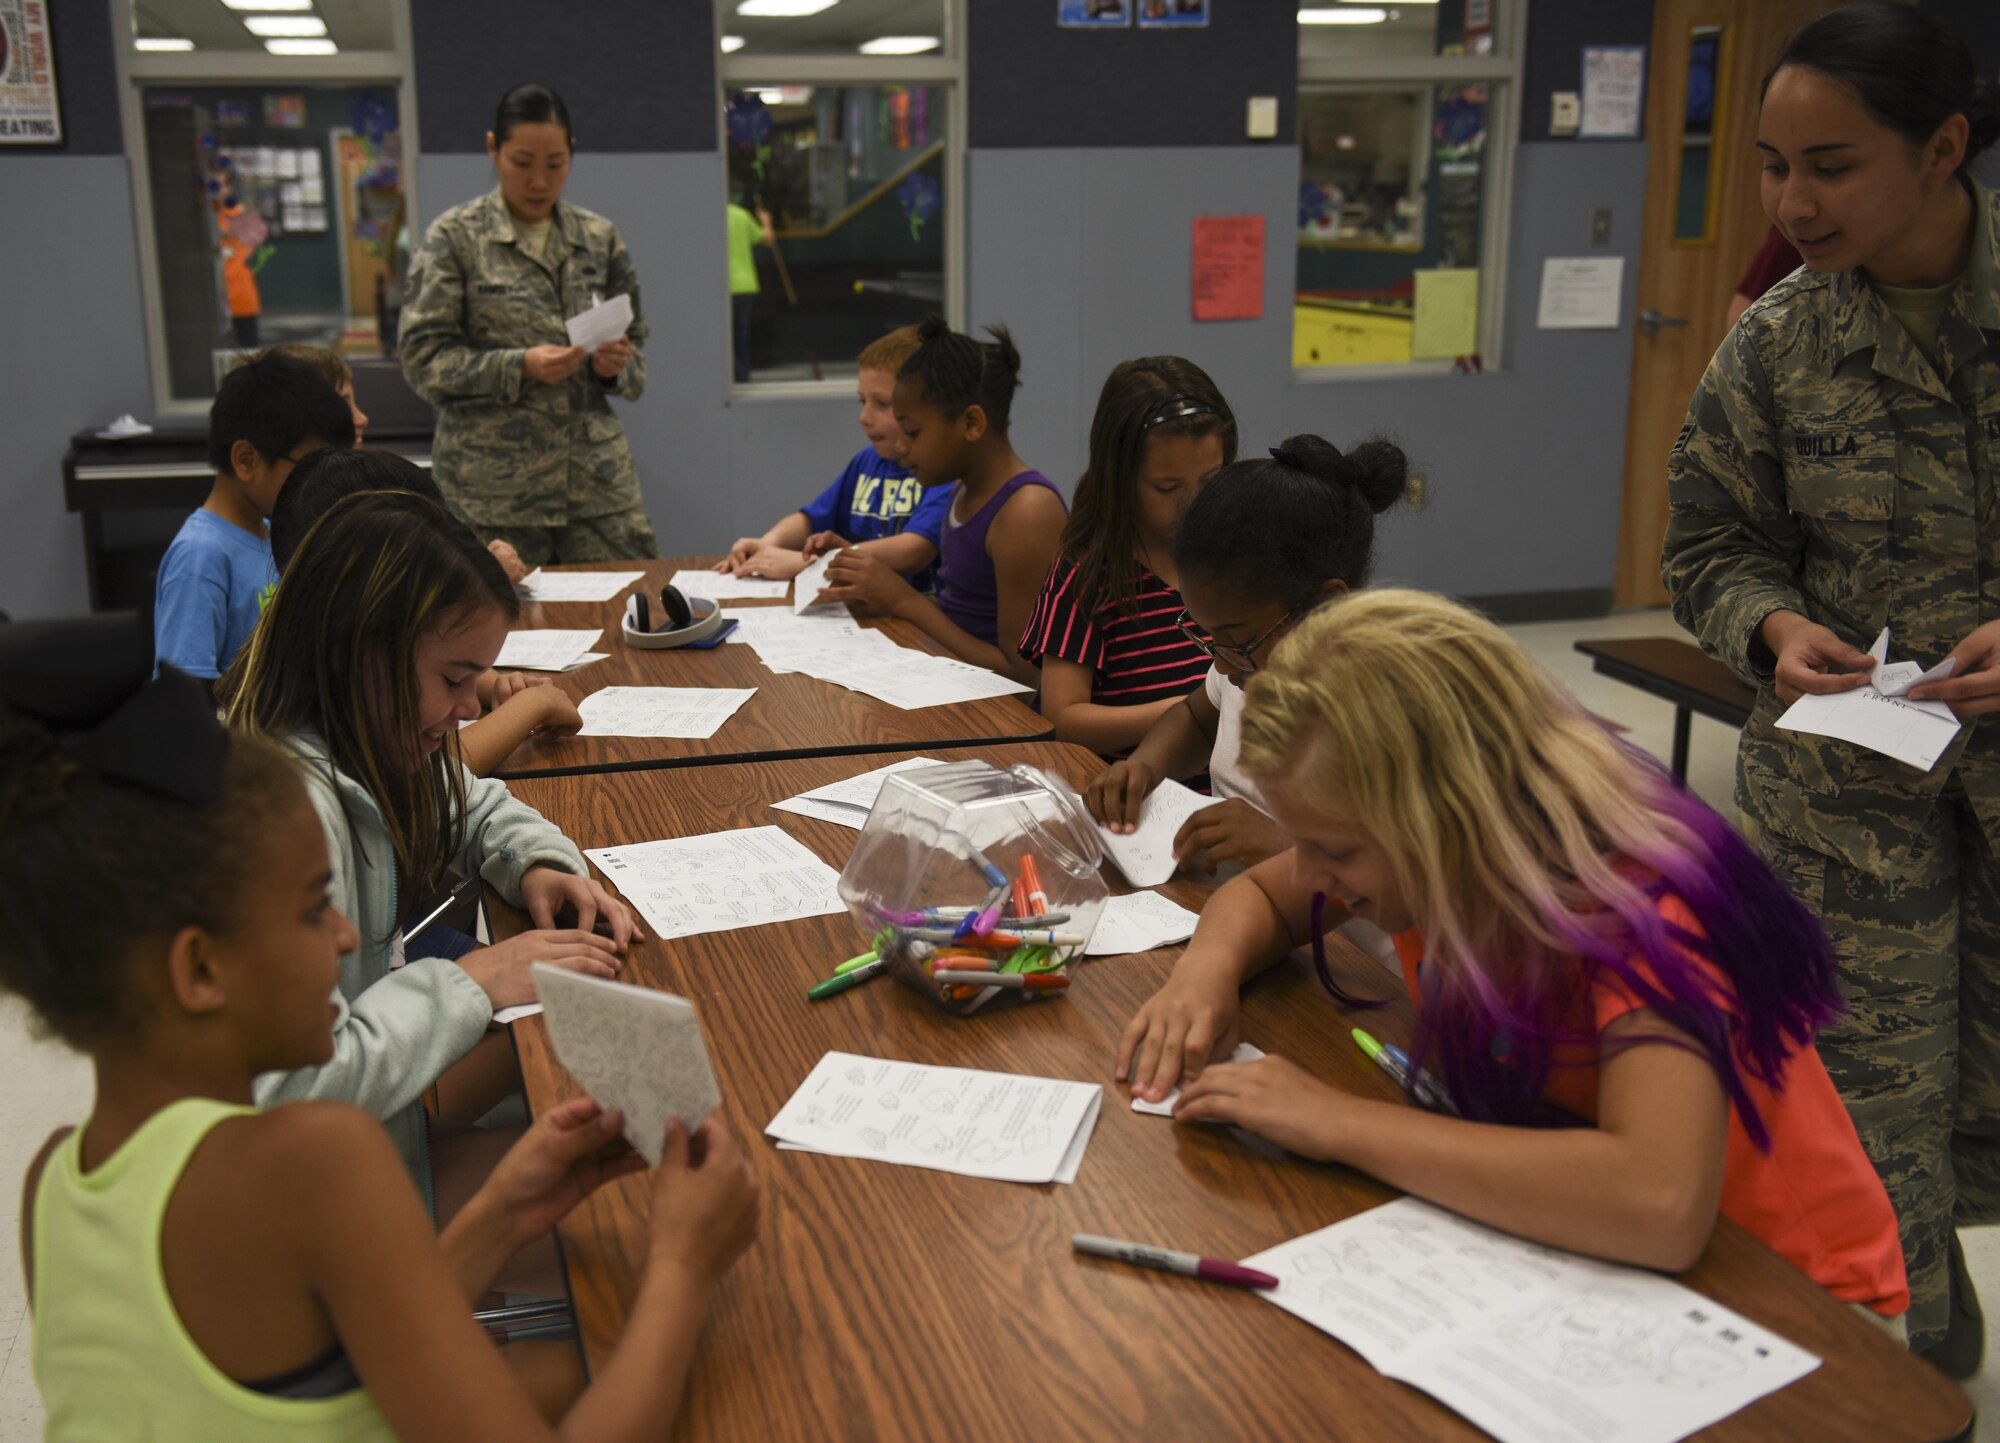 Members of the Asian Pacific American Heritage Association host an origami event for youth during Asian American Pacific Islander Heritage Month at Whiteman Air Force Base, Mo., May 10, 2017. The youth learned how to fold origami frogs, which is a symbol in Japanese culture for good fortune and it is often carried during travel to ensure the individual returns home safely. (U.S. Air Force courtesy photo by Staff Sgt. Rey Jee Quilla)